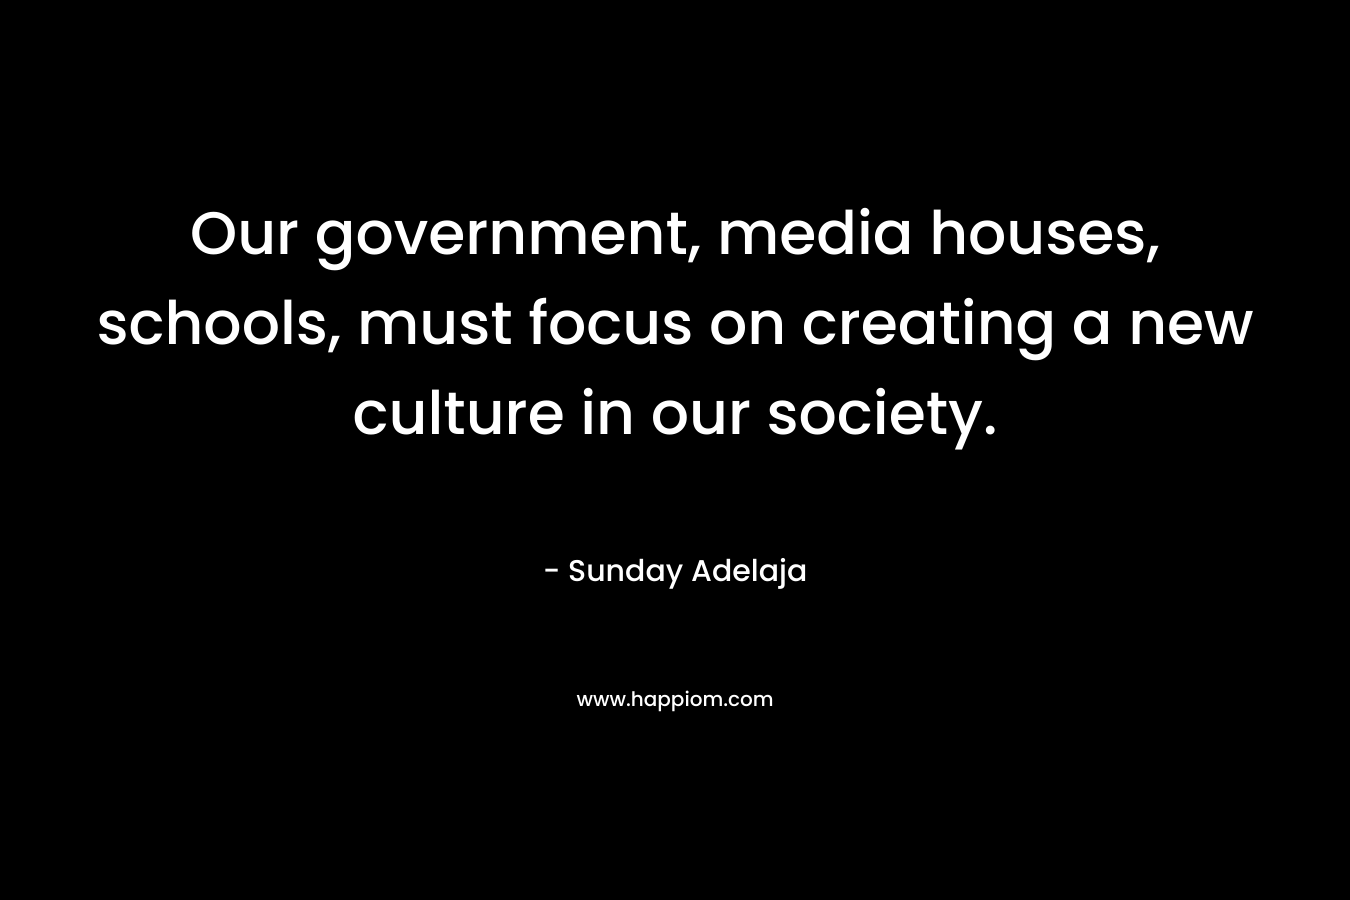 Our government, media houses, schools, must focus on creating a new culture in our society.